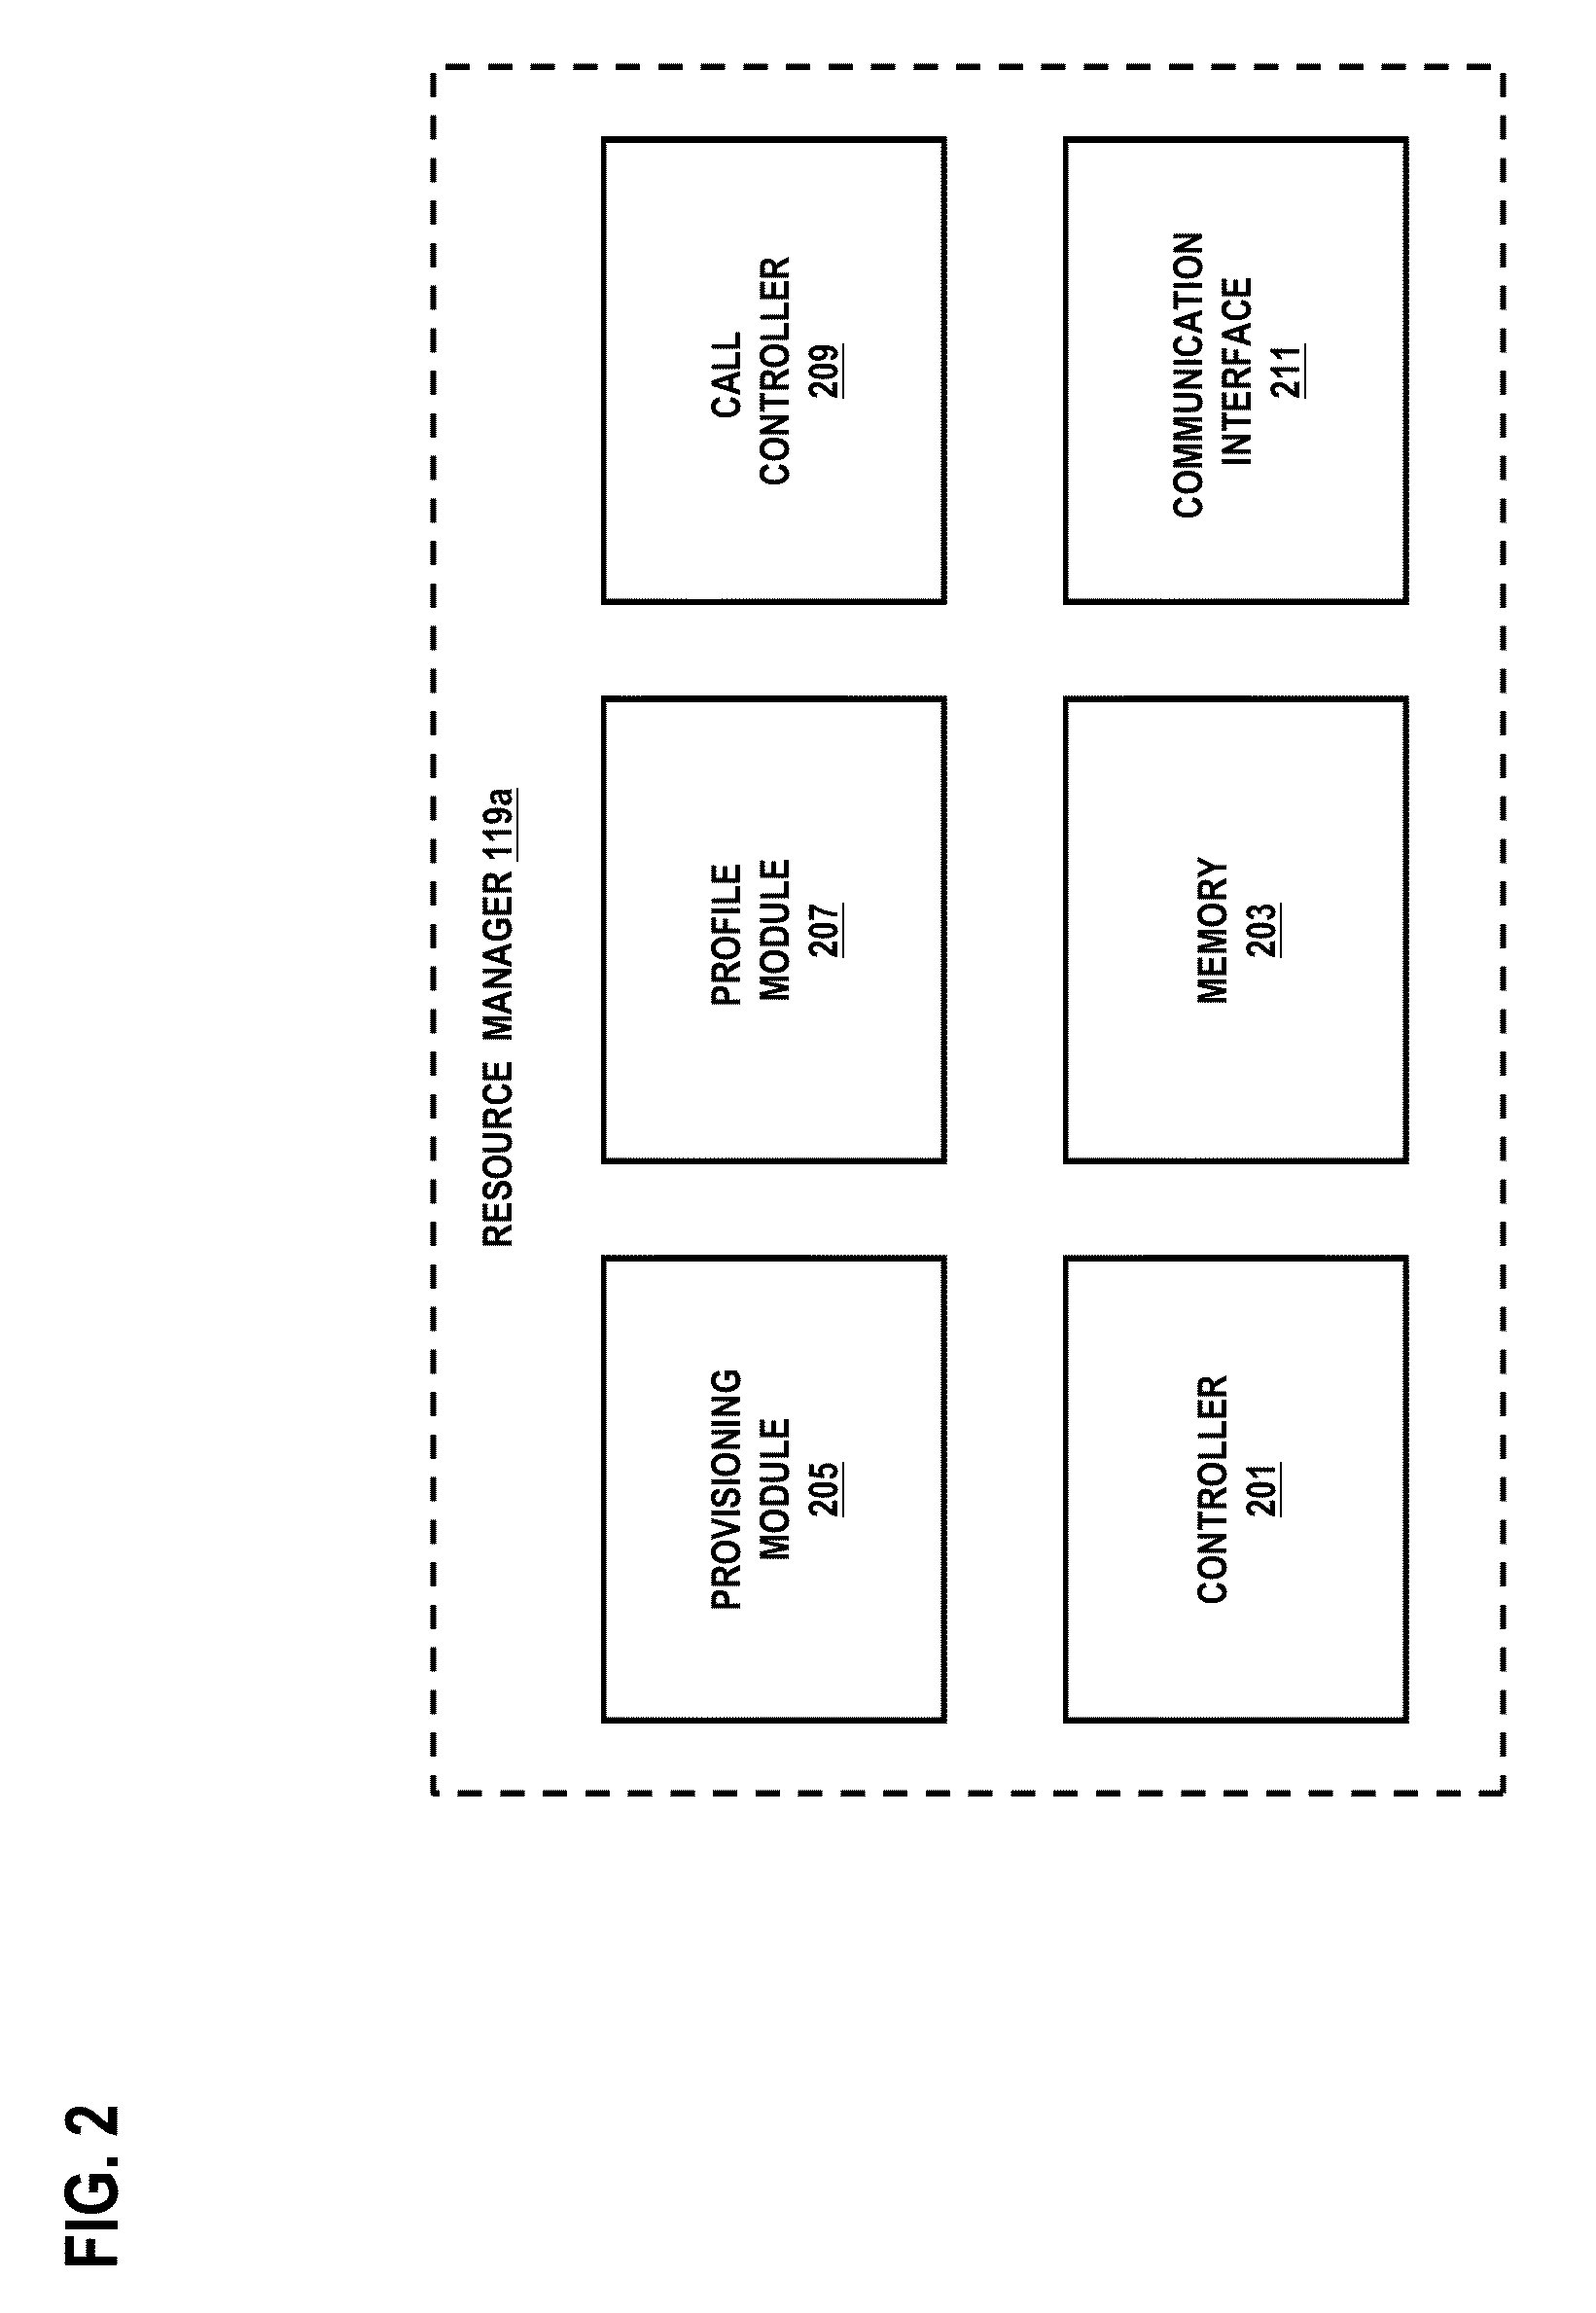 Method and apparatus providing a user interface for a request-oriented service architecture